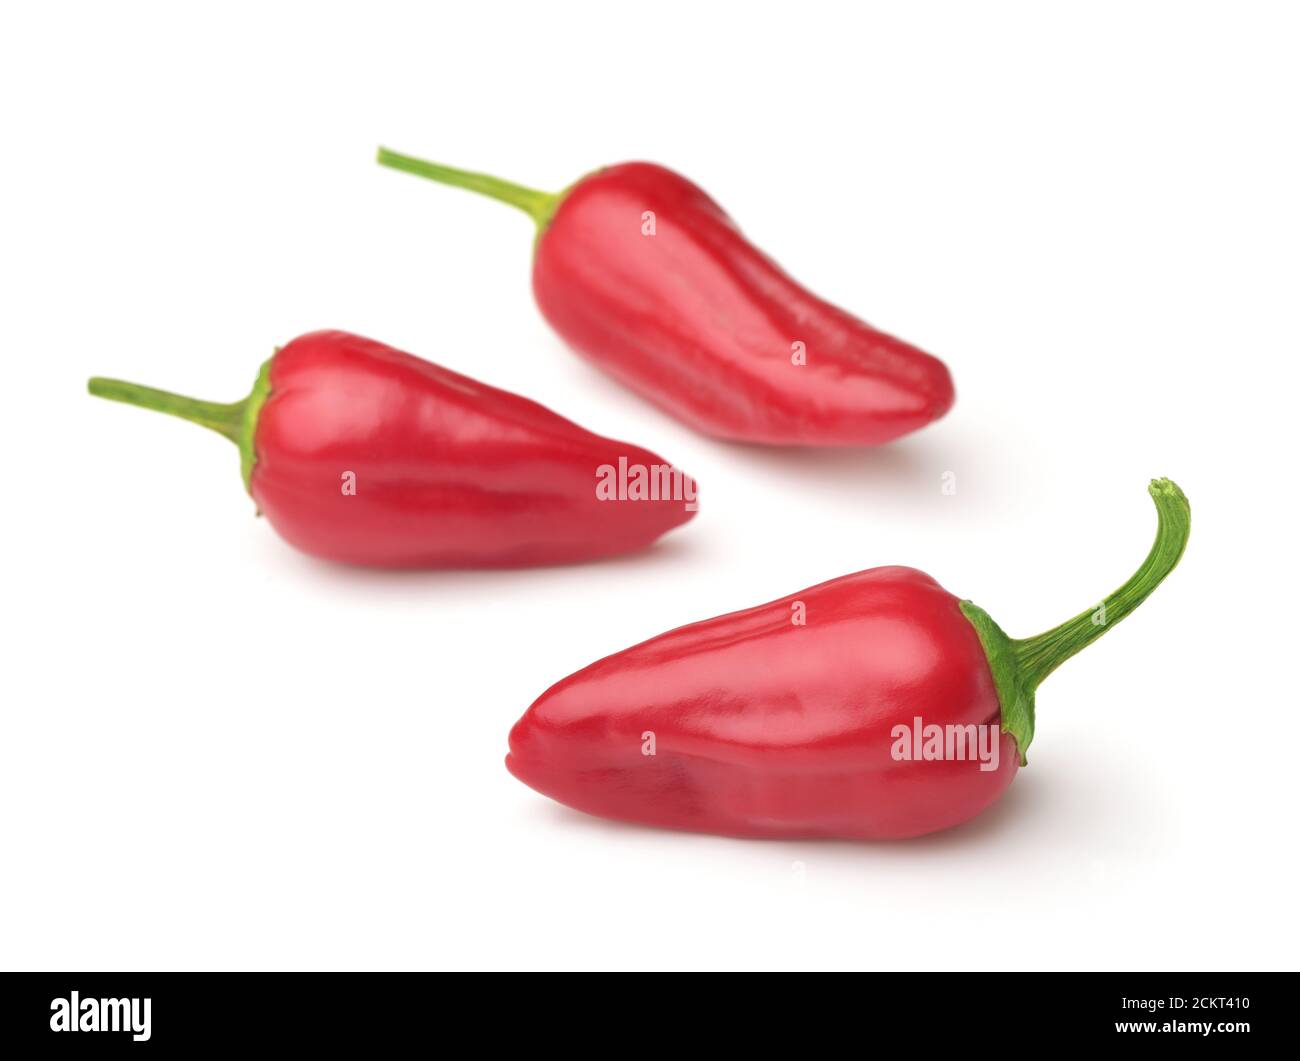 Three red jalapeno chili peppers isolated on white Stock Photo